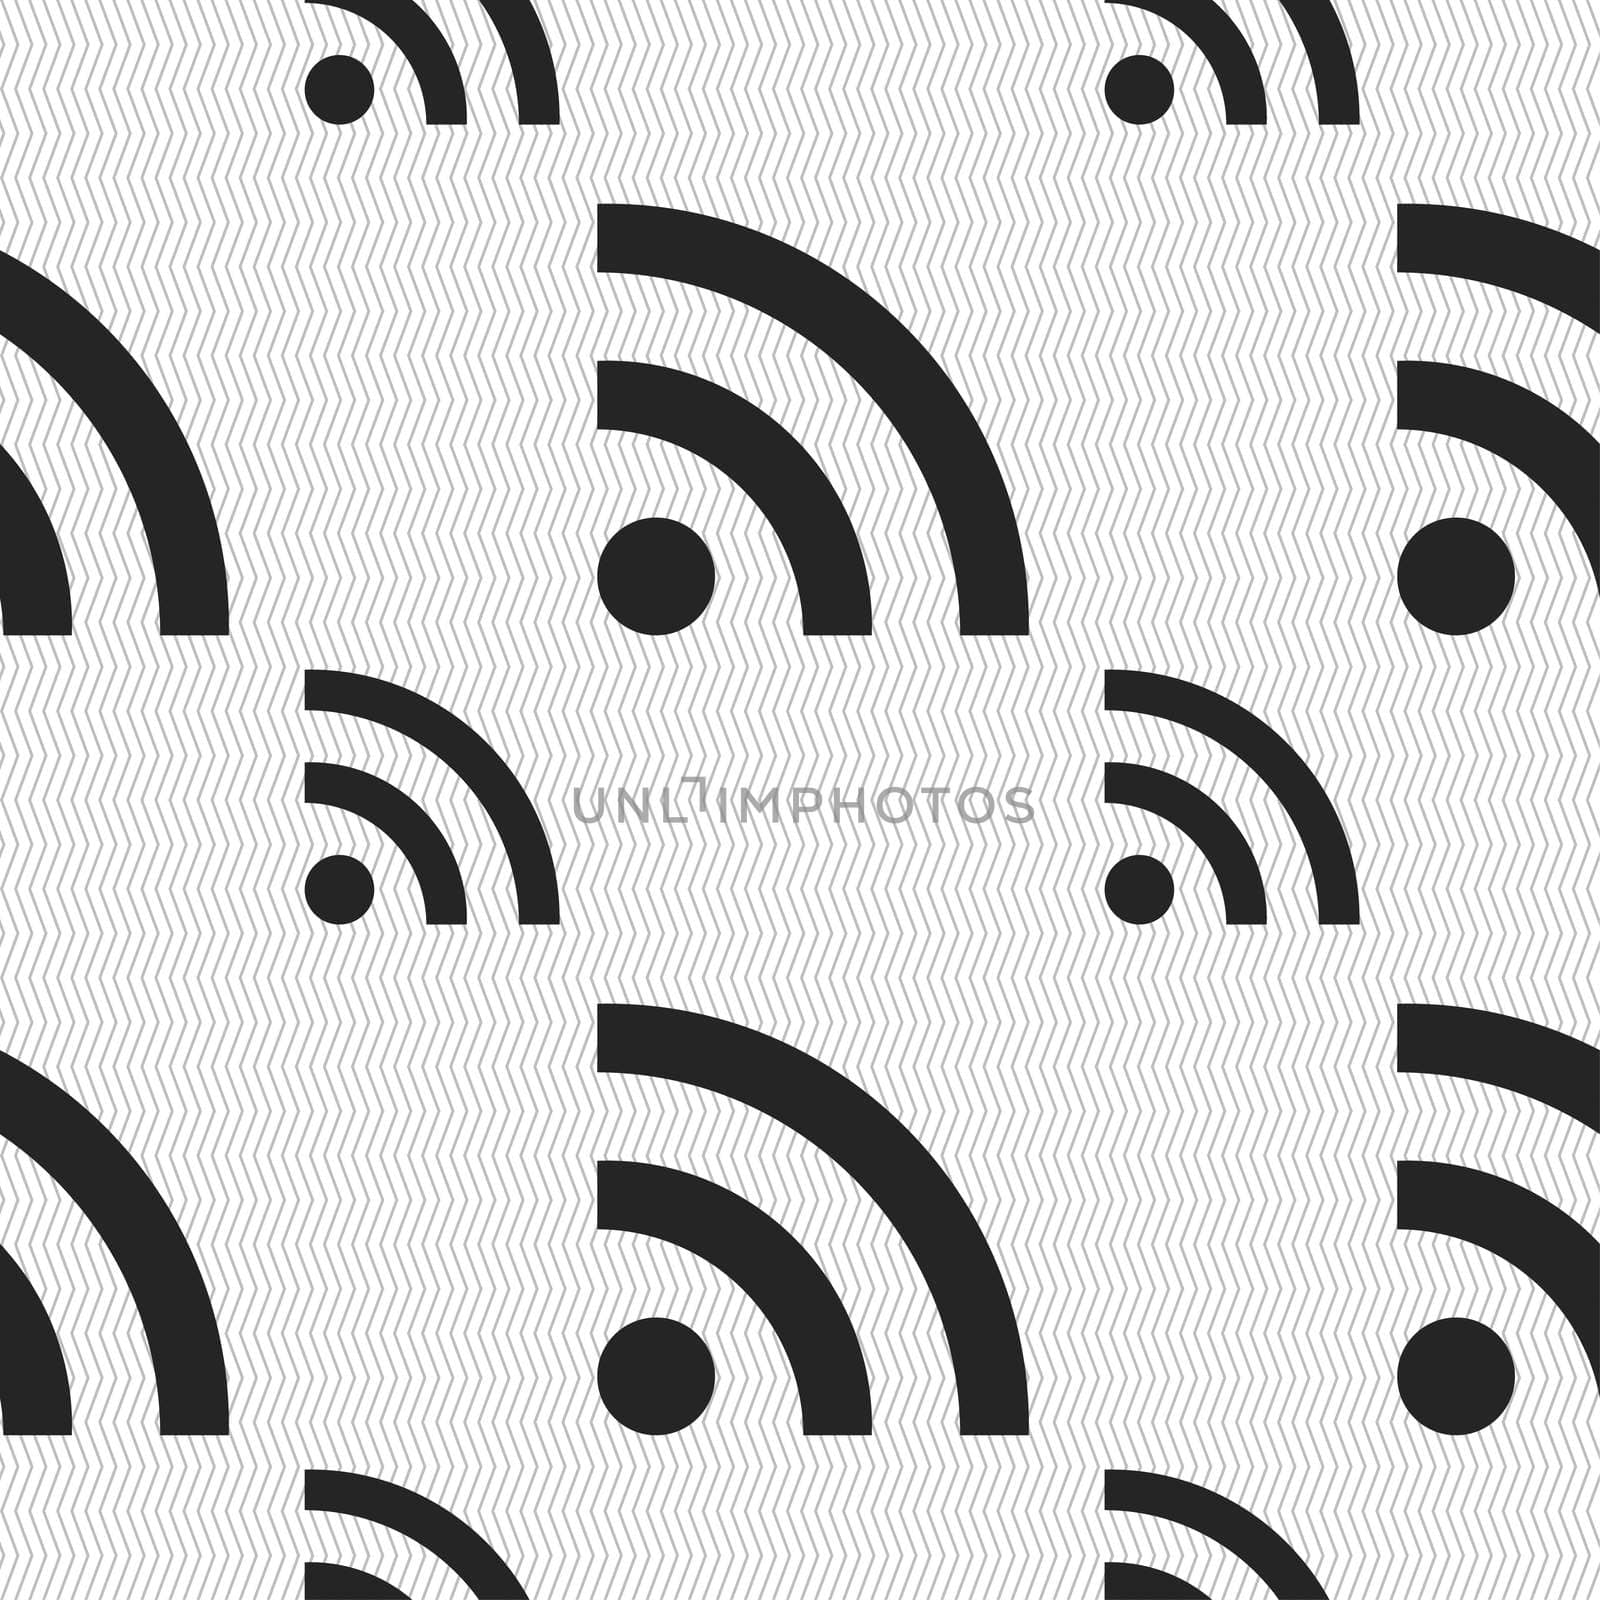 Wifi, Wi-fi, Wireless Network icon sign. Seamless pattern with geometric texture. illustration